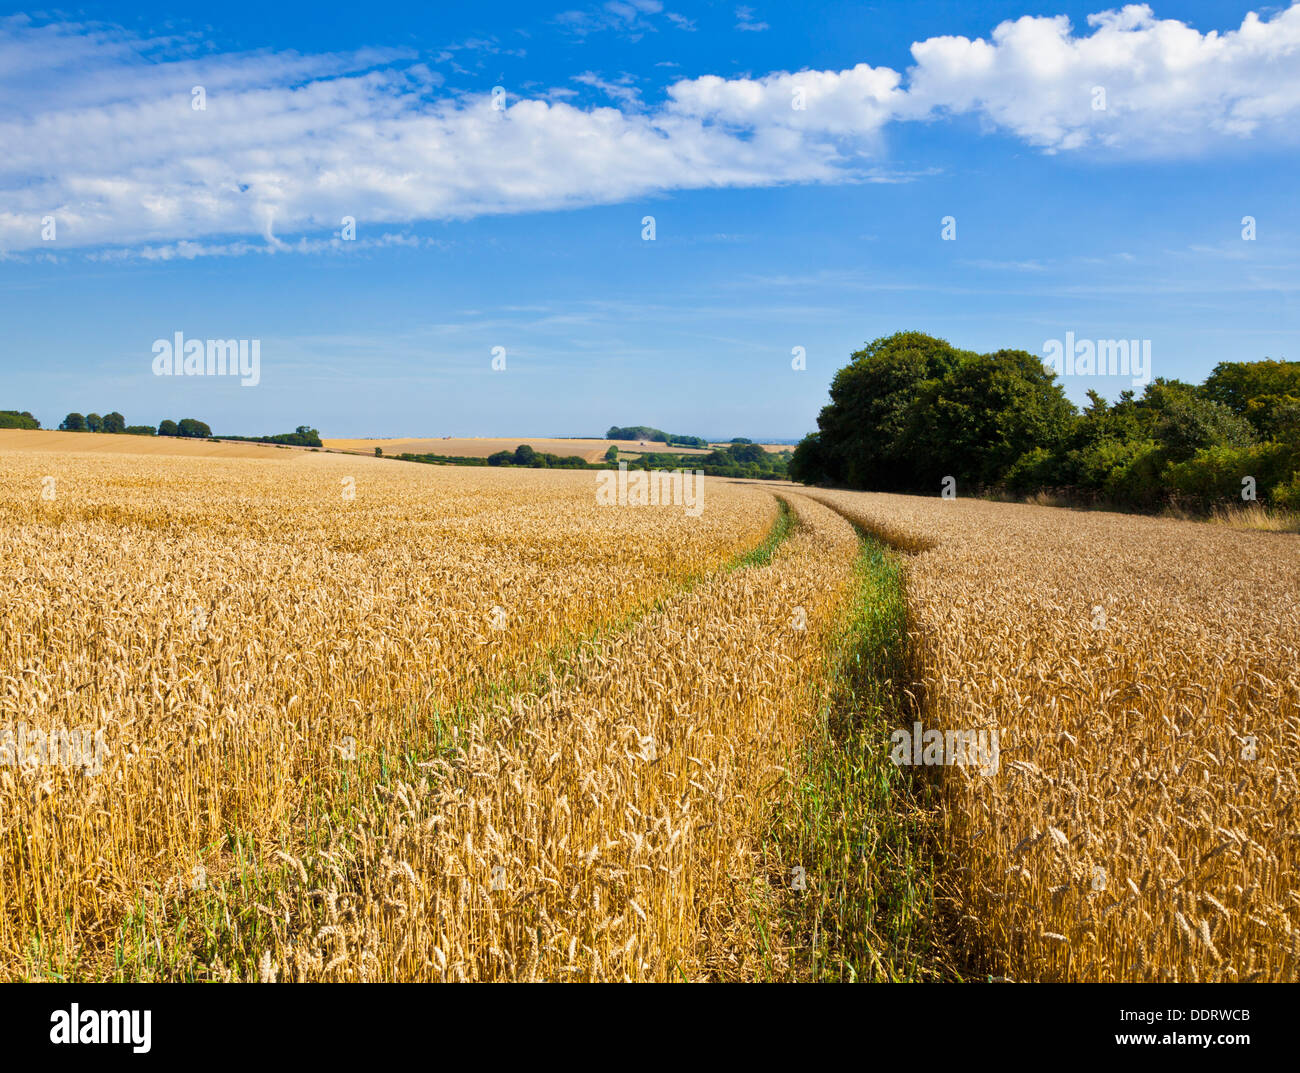 Crops in fields ready for harvesting near Louth Lincolnshire wolds England UK GB EU Europe Stock Photo